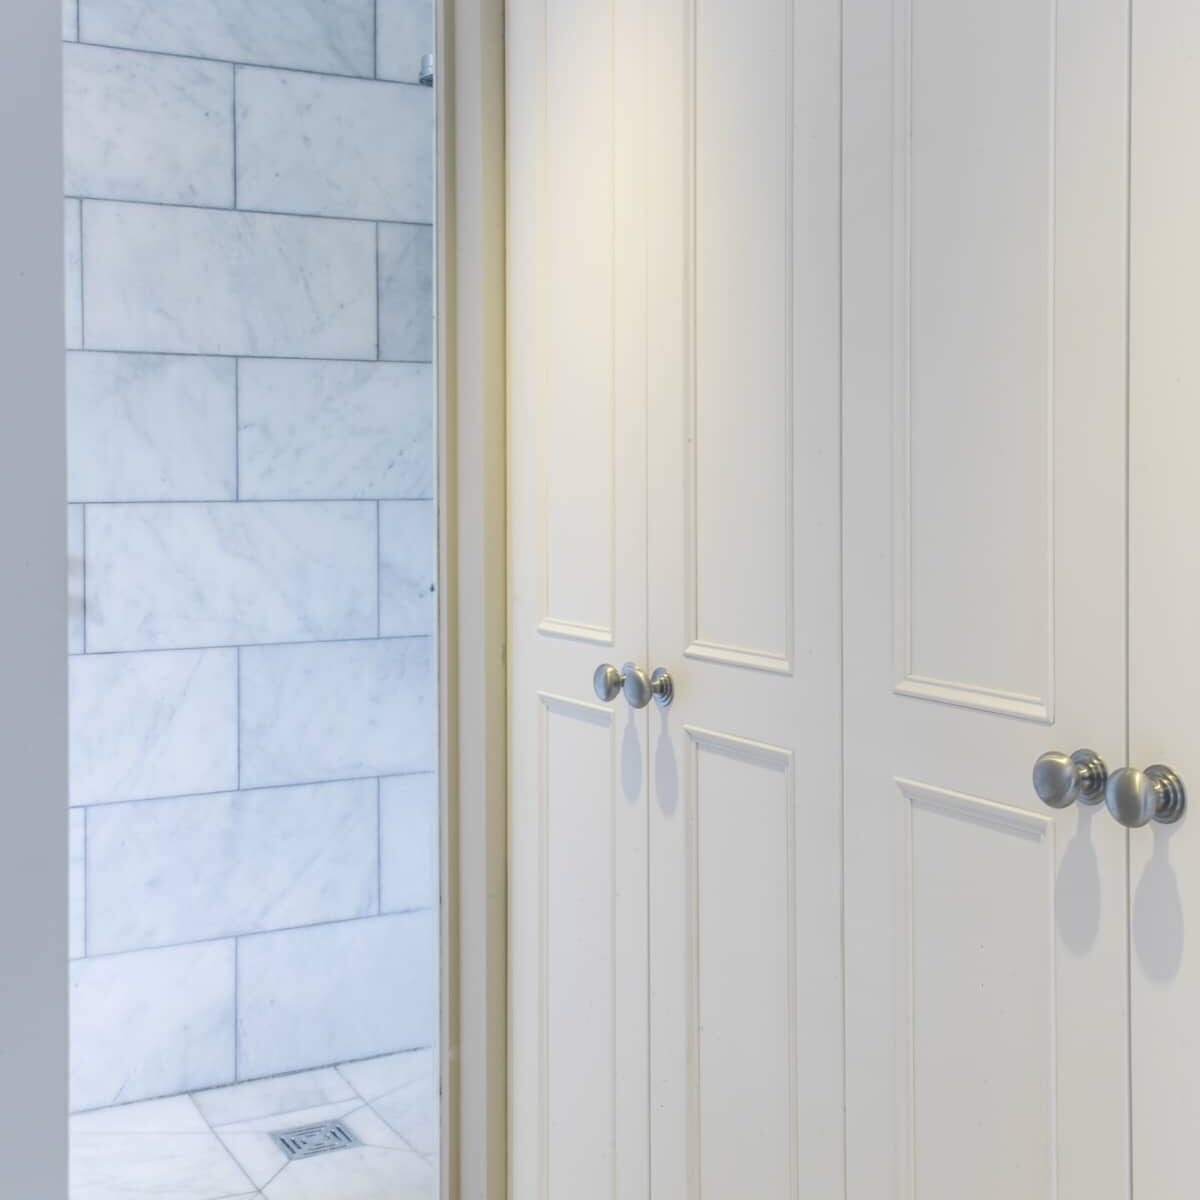 Fitted storage solutions in a contemporary bathroom.